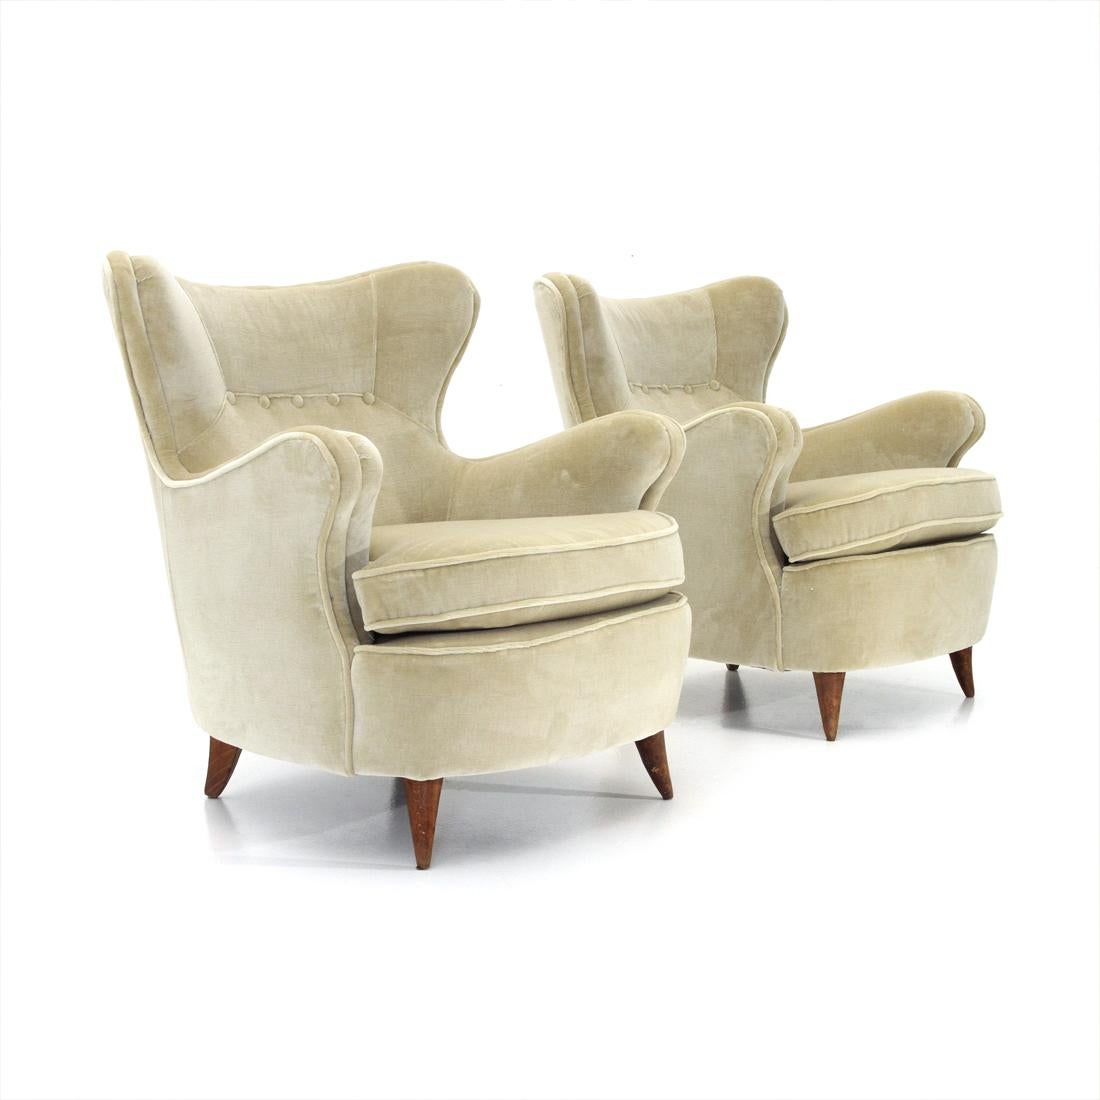 Pair of Italian-made armchairs produced in the 1940s.
Padded wooden structure lined with new cream velvet fabric.
Seat with cushion.
Backstitched with 4 buttons.
Fang-shaped wooden legs.
Good general condition, some signs and restored woodworm